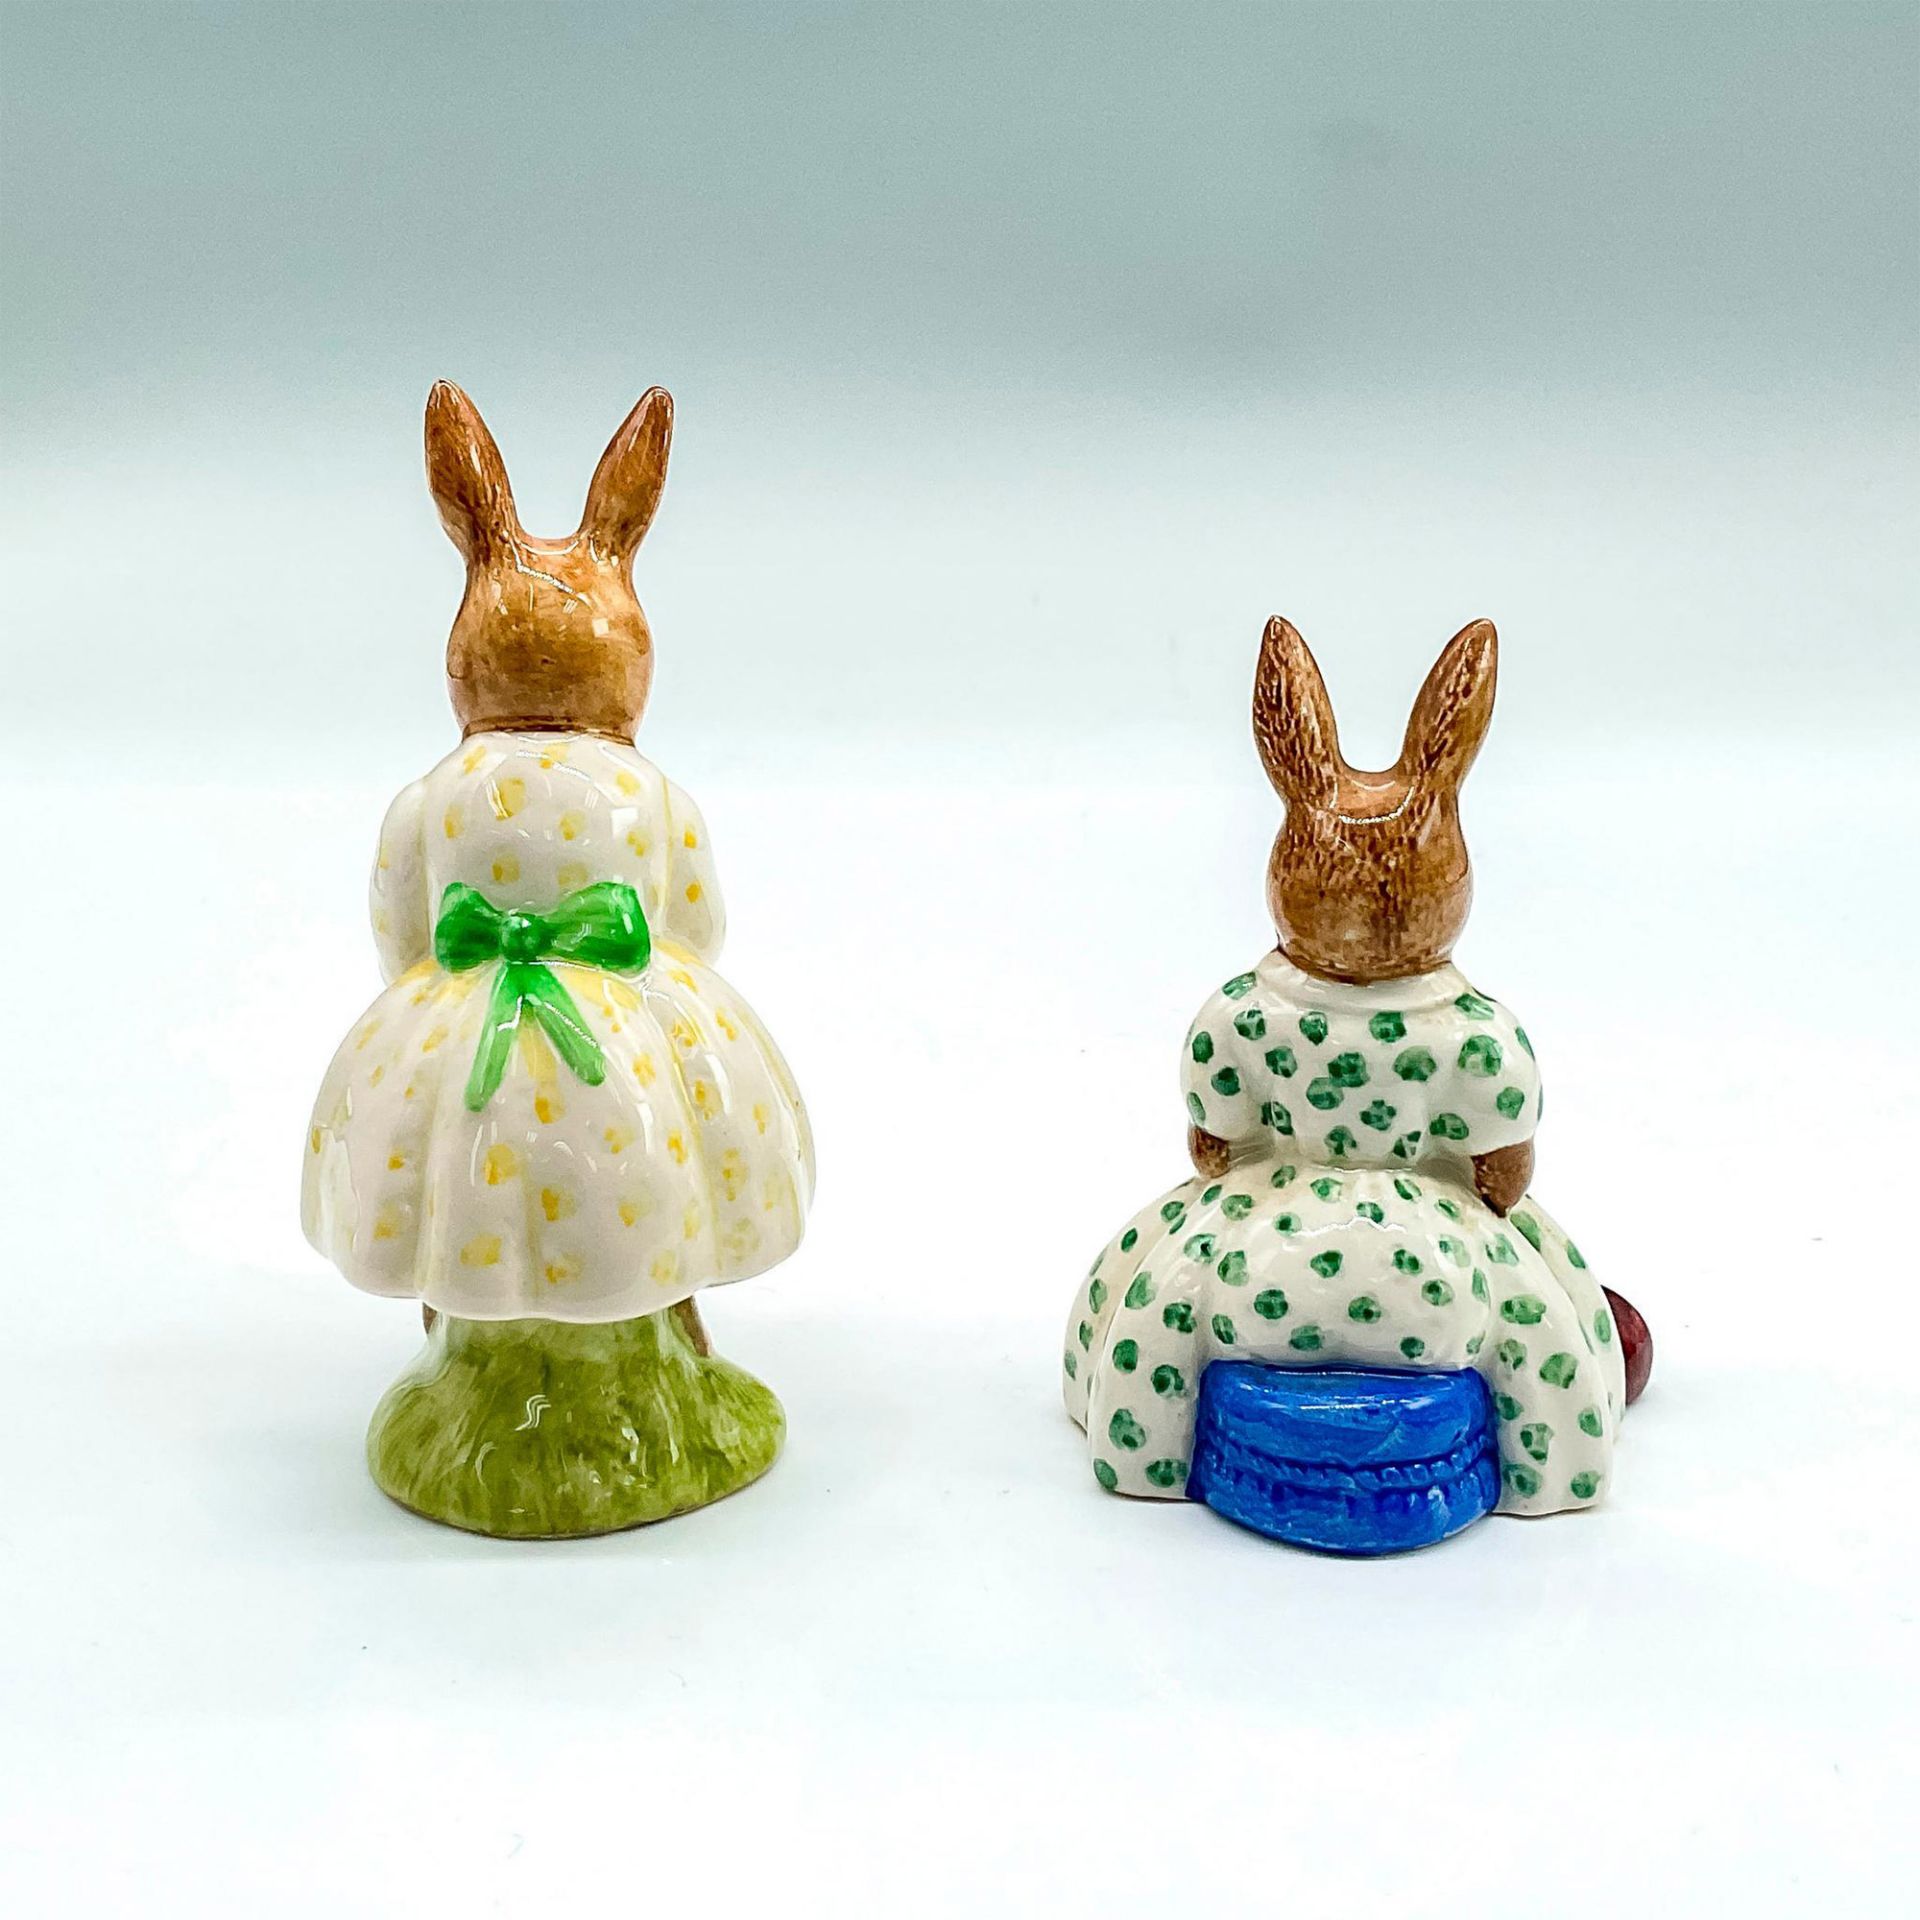 2 Royal Doulton Bunnykins Figurines, Playtime + Busy Needles - Image 2 of 3